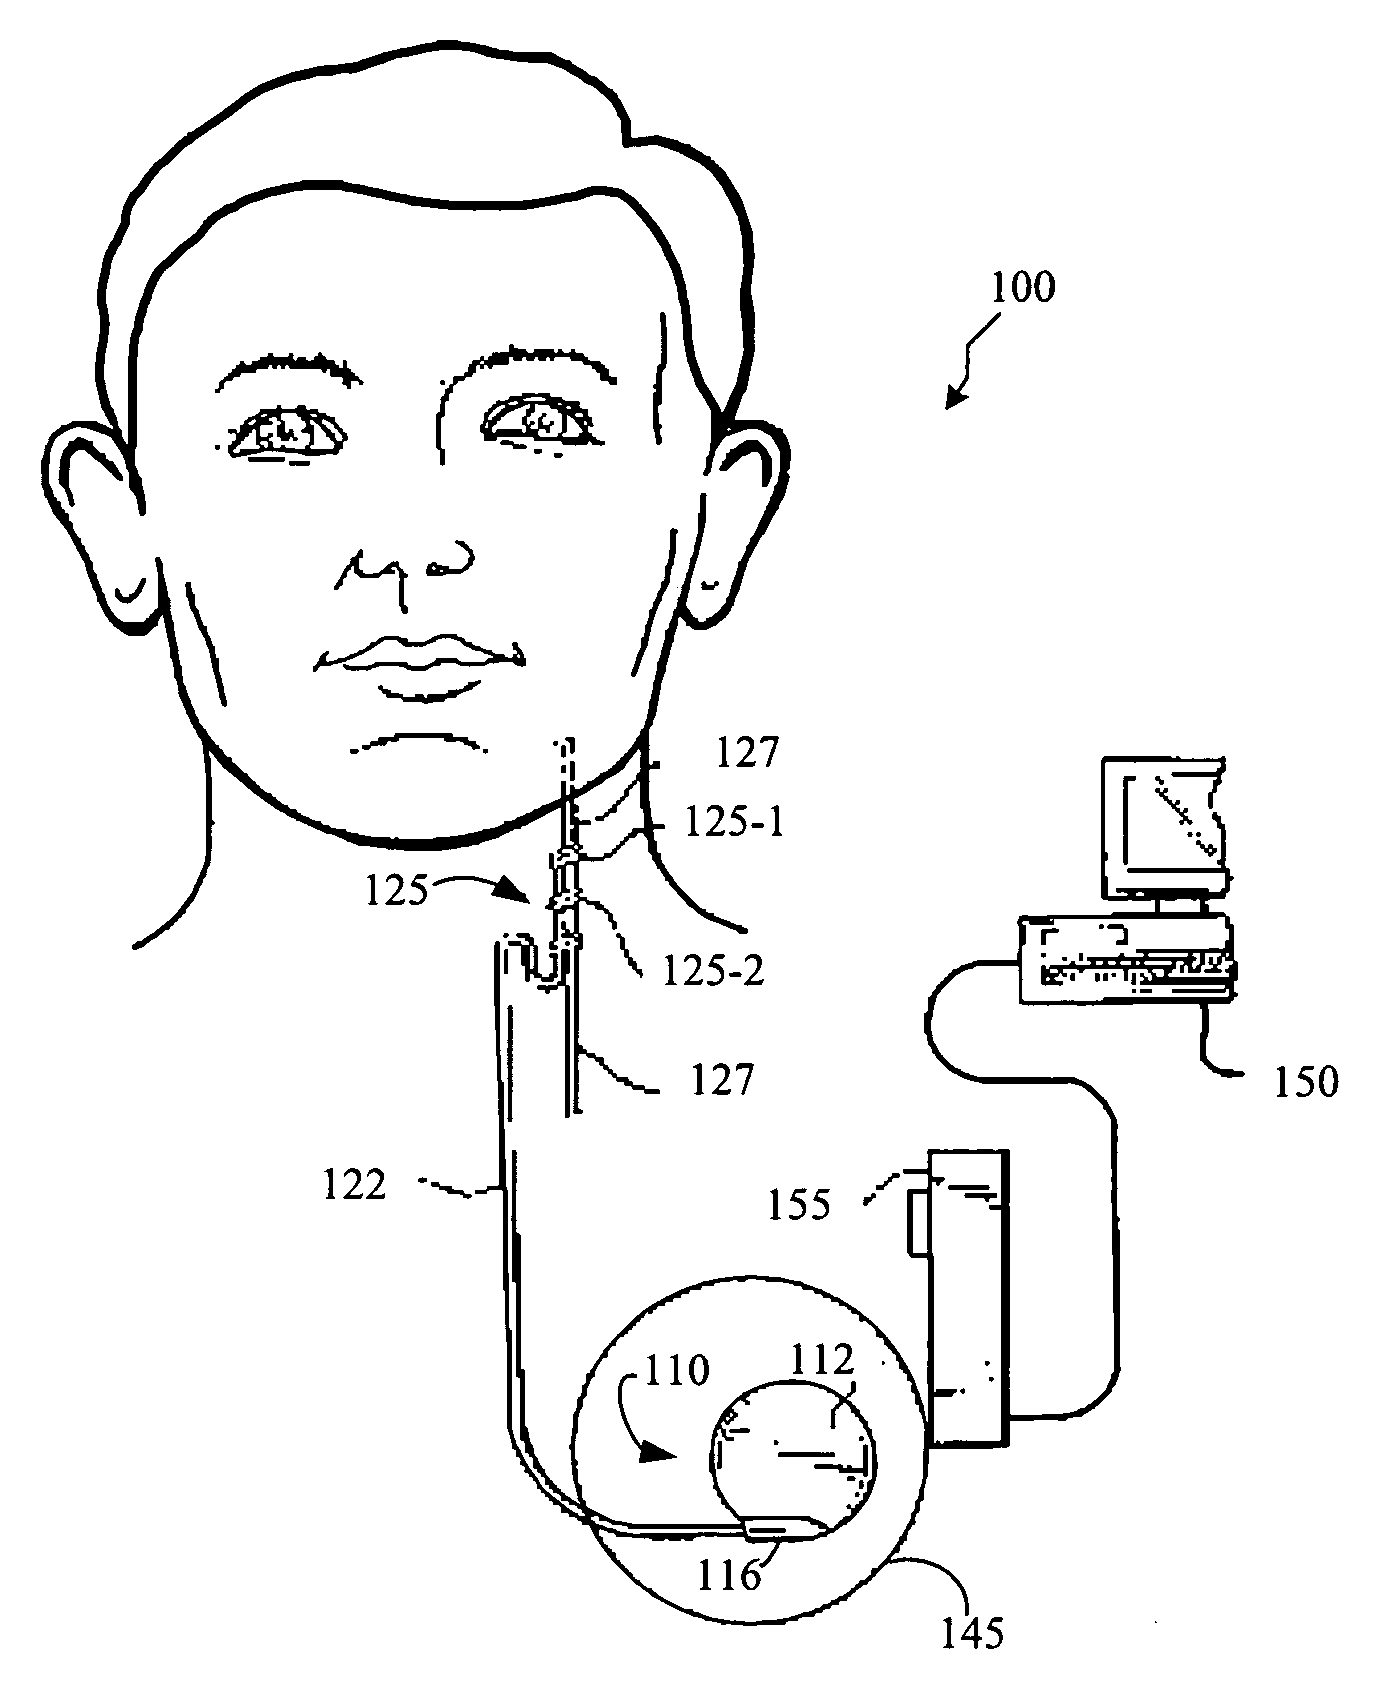 Changeable electrode polarity stimulation by an implantable medical device